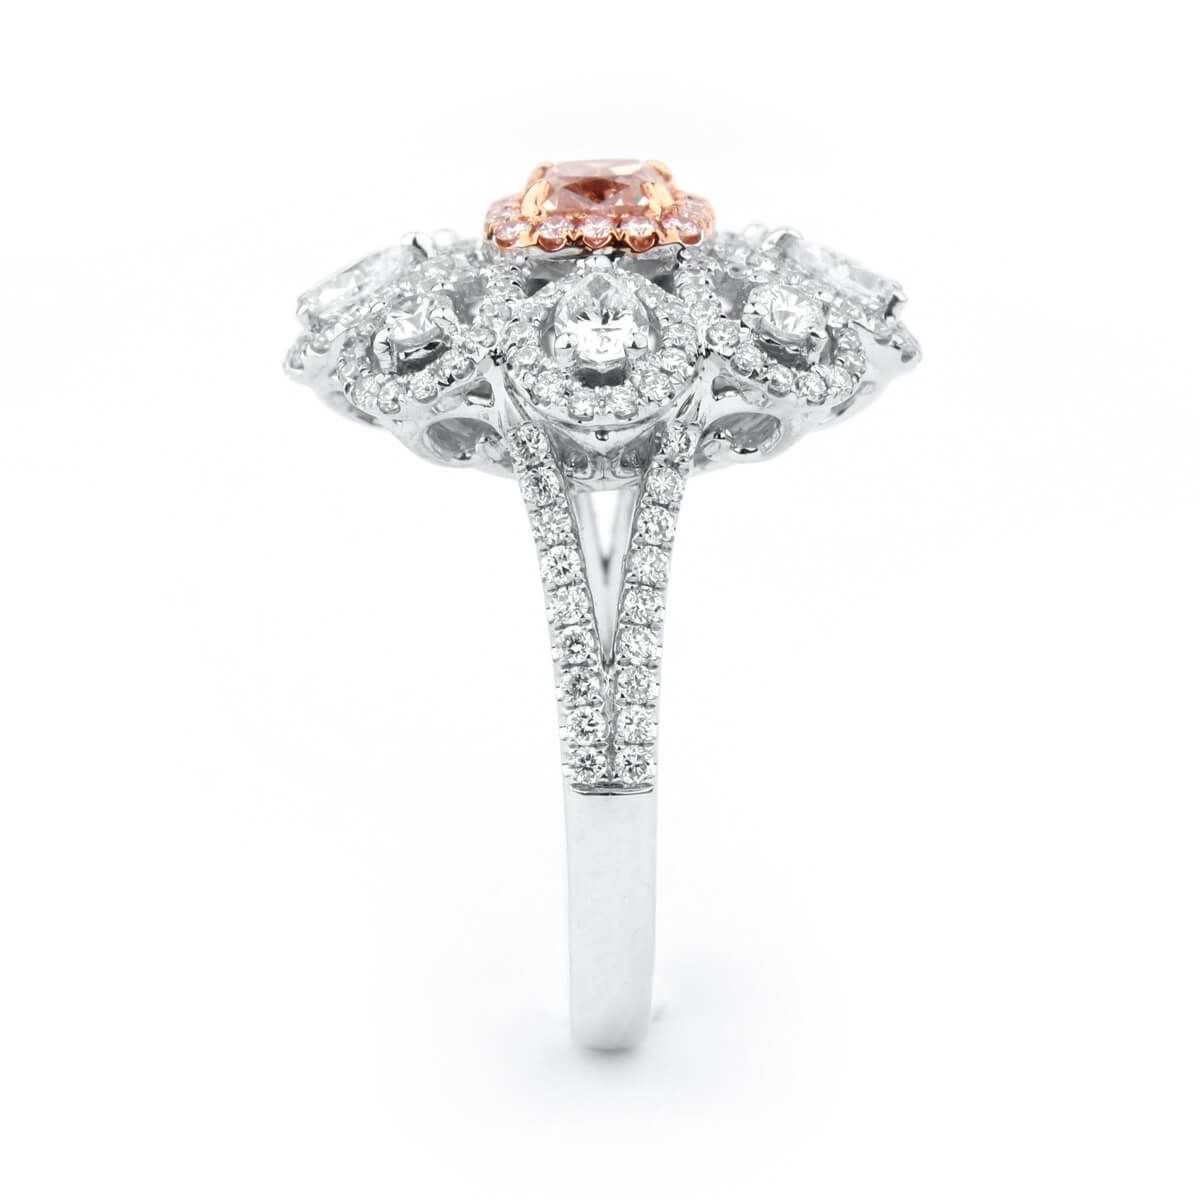 Fancy Orangy Pink Diamond Ring, 0.66 Ct. (2.31 Ct. TW), Radiant shape, GIA Certified, 1162871776